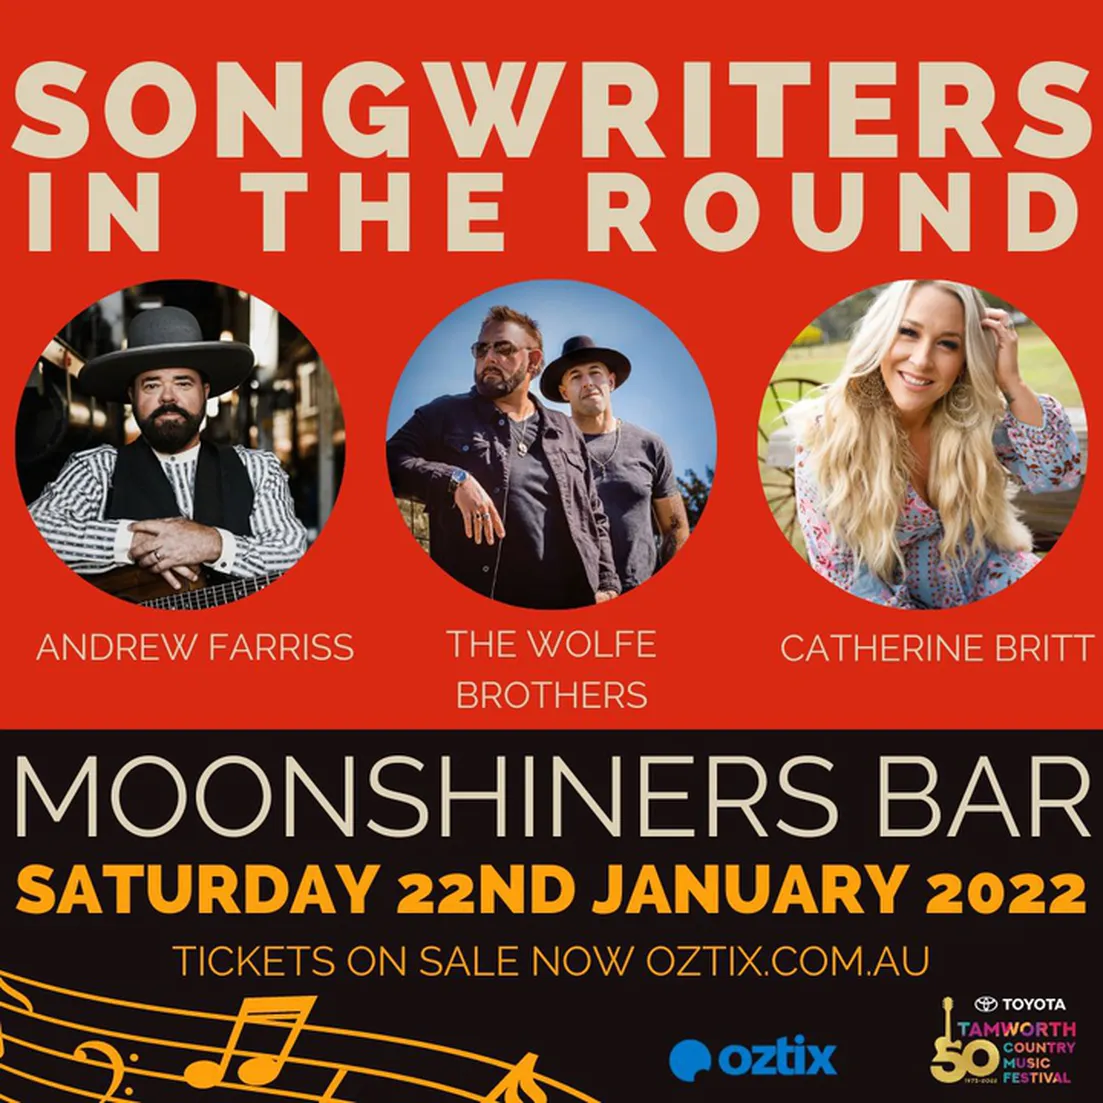 Moonshiners 2022 Schedule Bandsintown | The Wolfe Brothers Tickets - Moonshiners Honky Tonk Bar, Apr  20, 2022